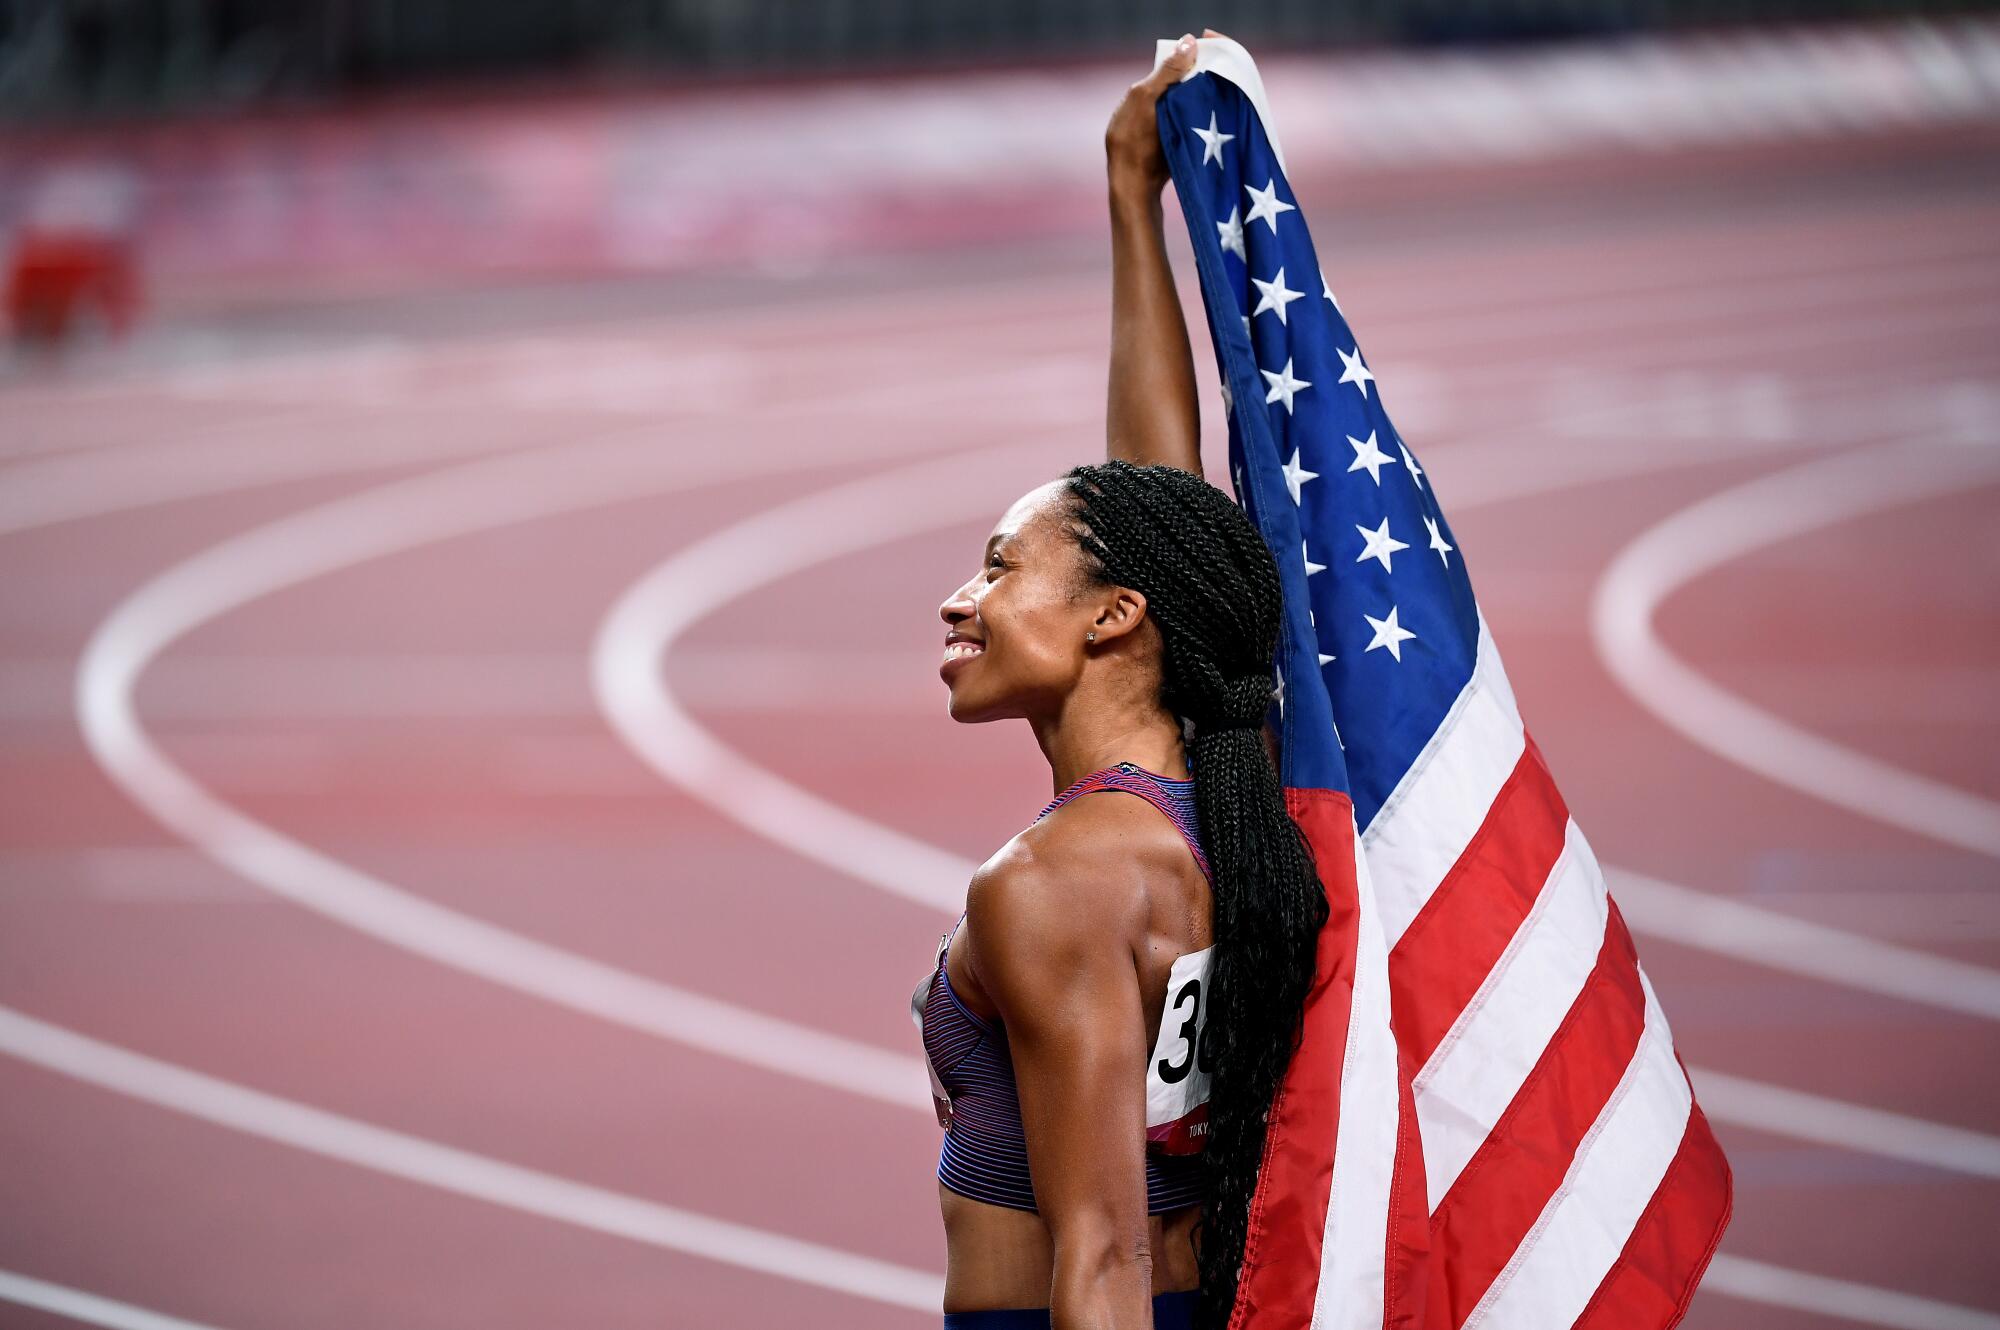 Allyson Felix smiles and holds up an American flag after winning the bronze medal in the 400-meter race 